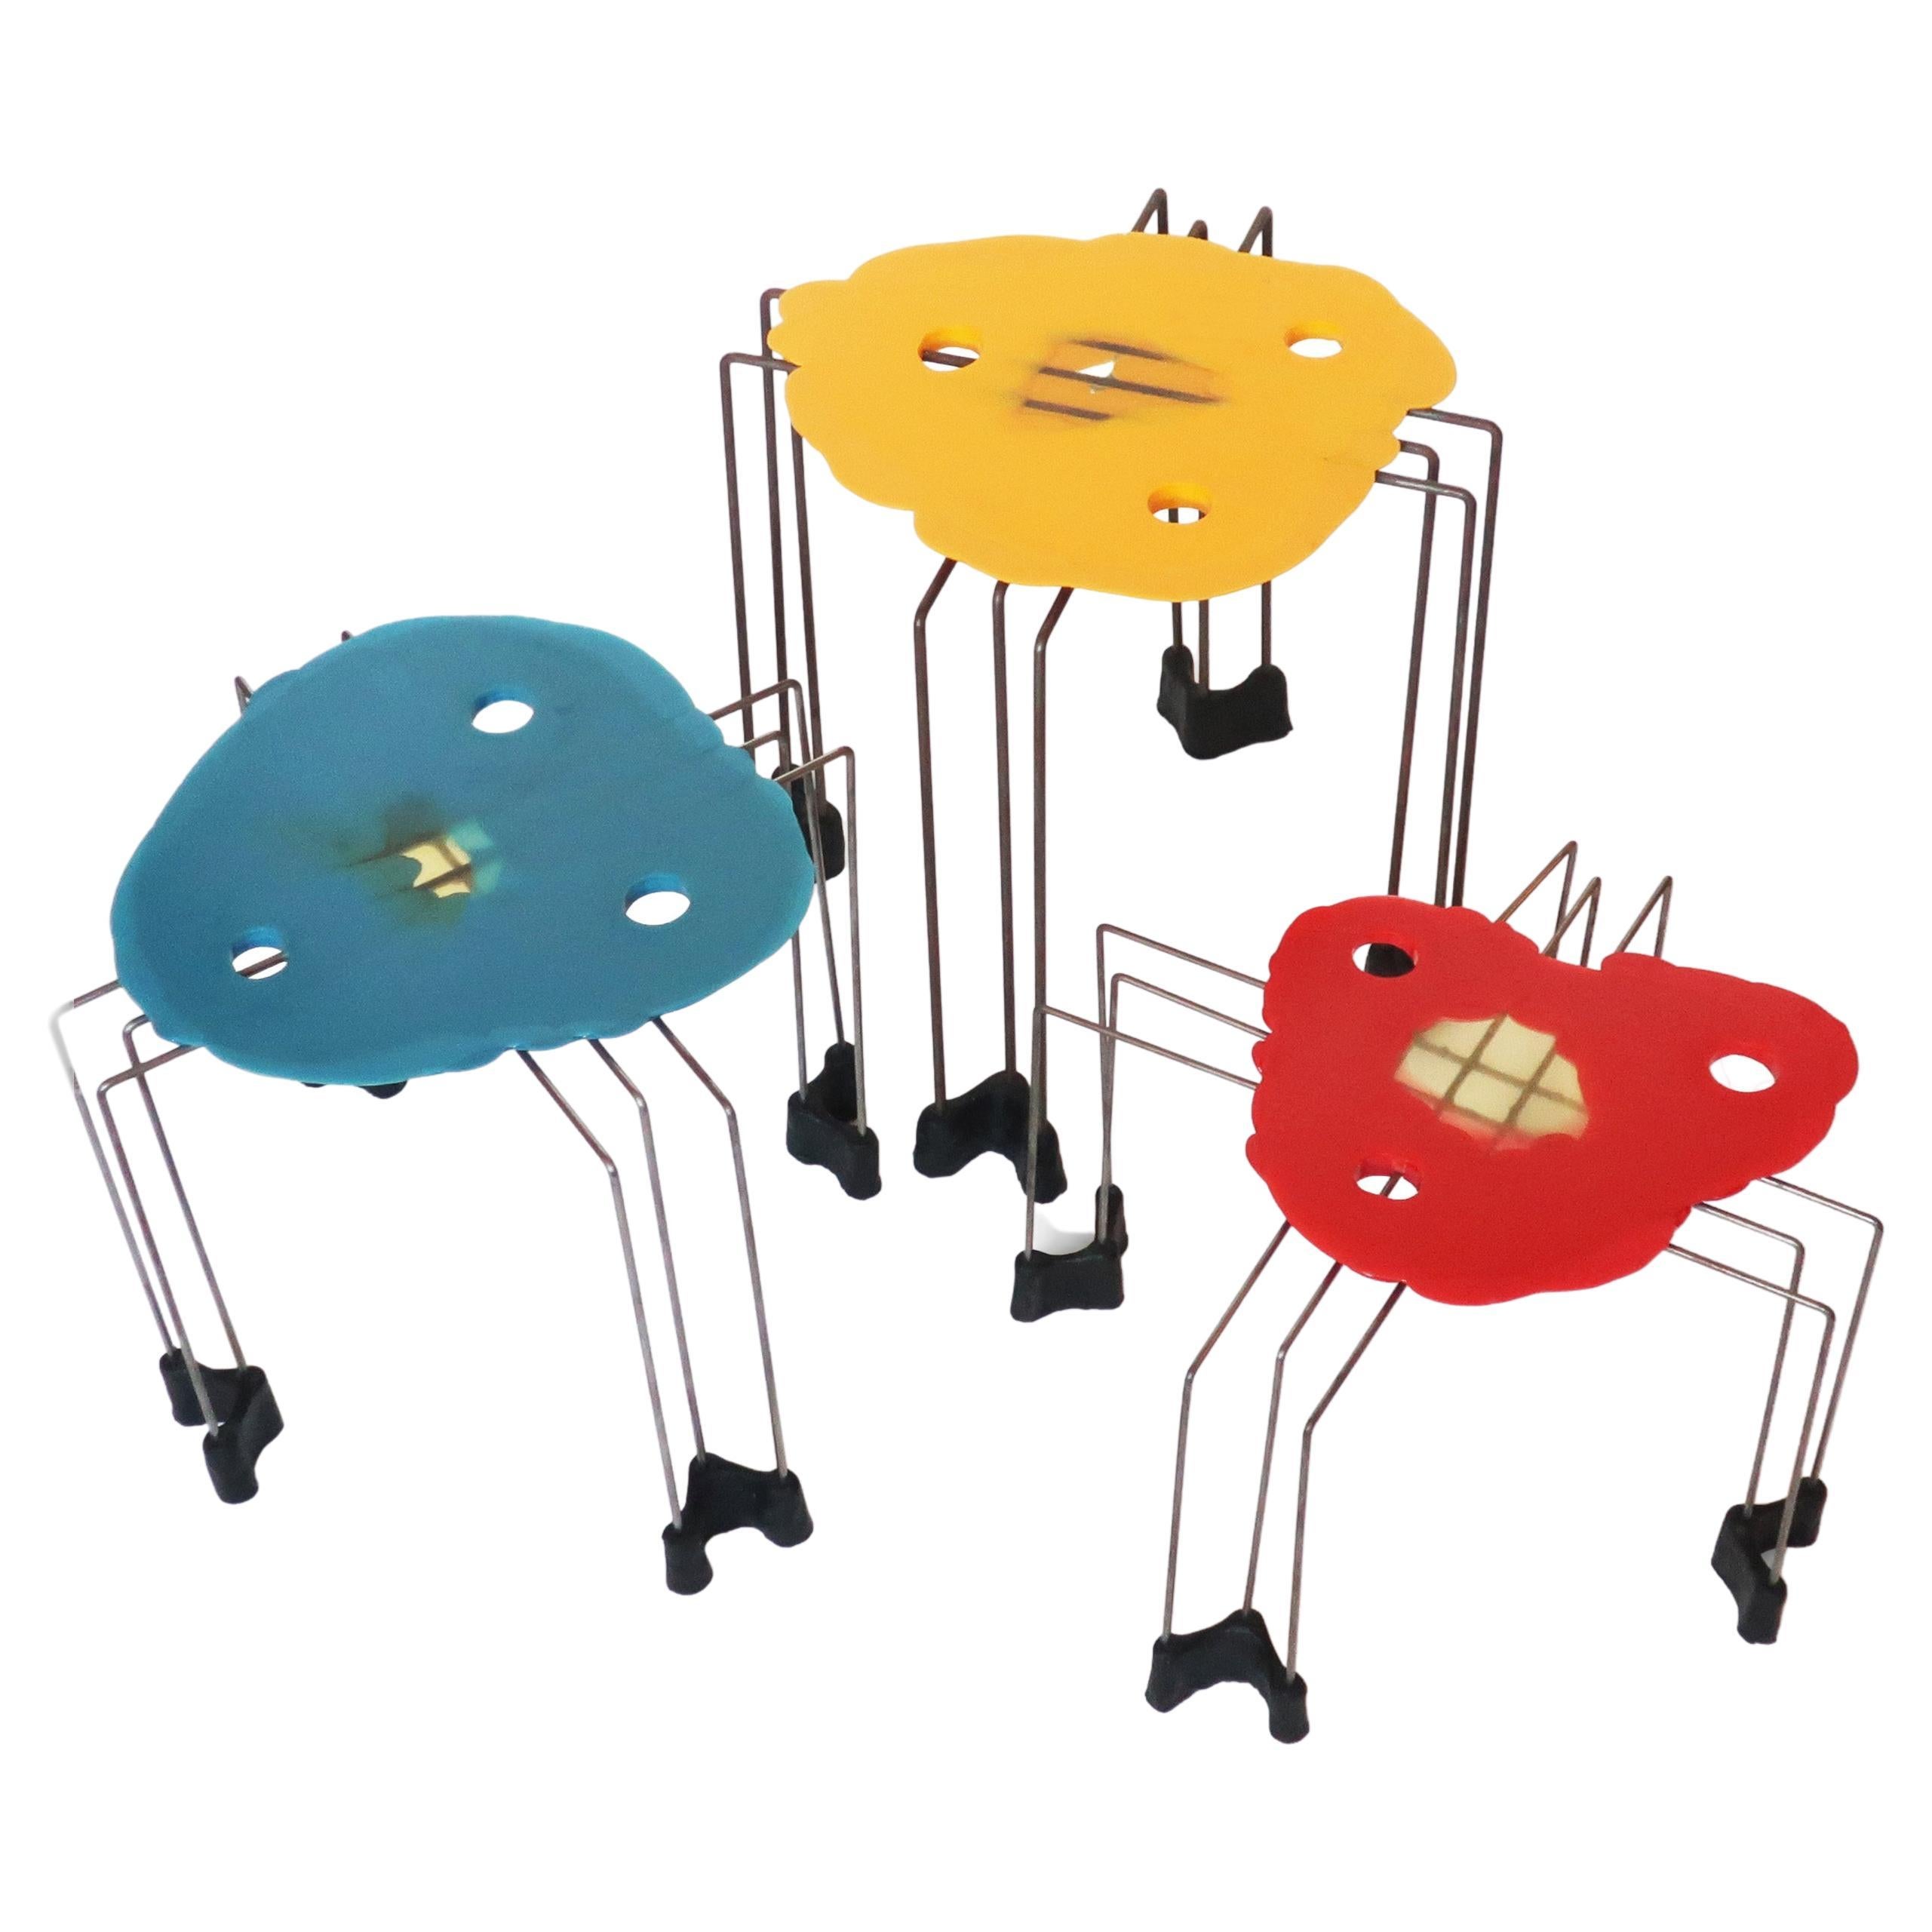 Set of Three Early Triple Play Tables by Gaetano Pesce for Fish Design, '1996' For Sale